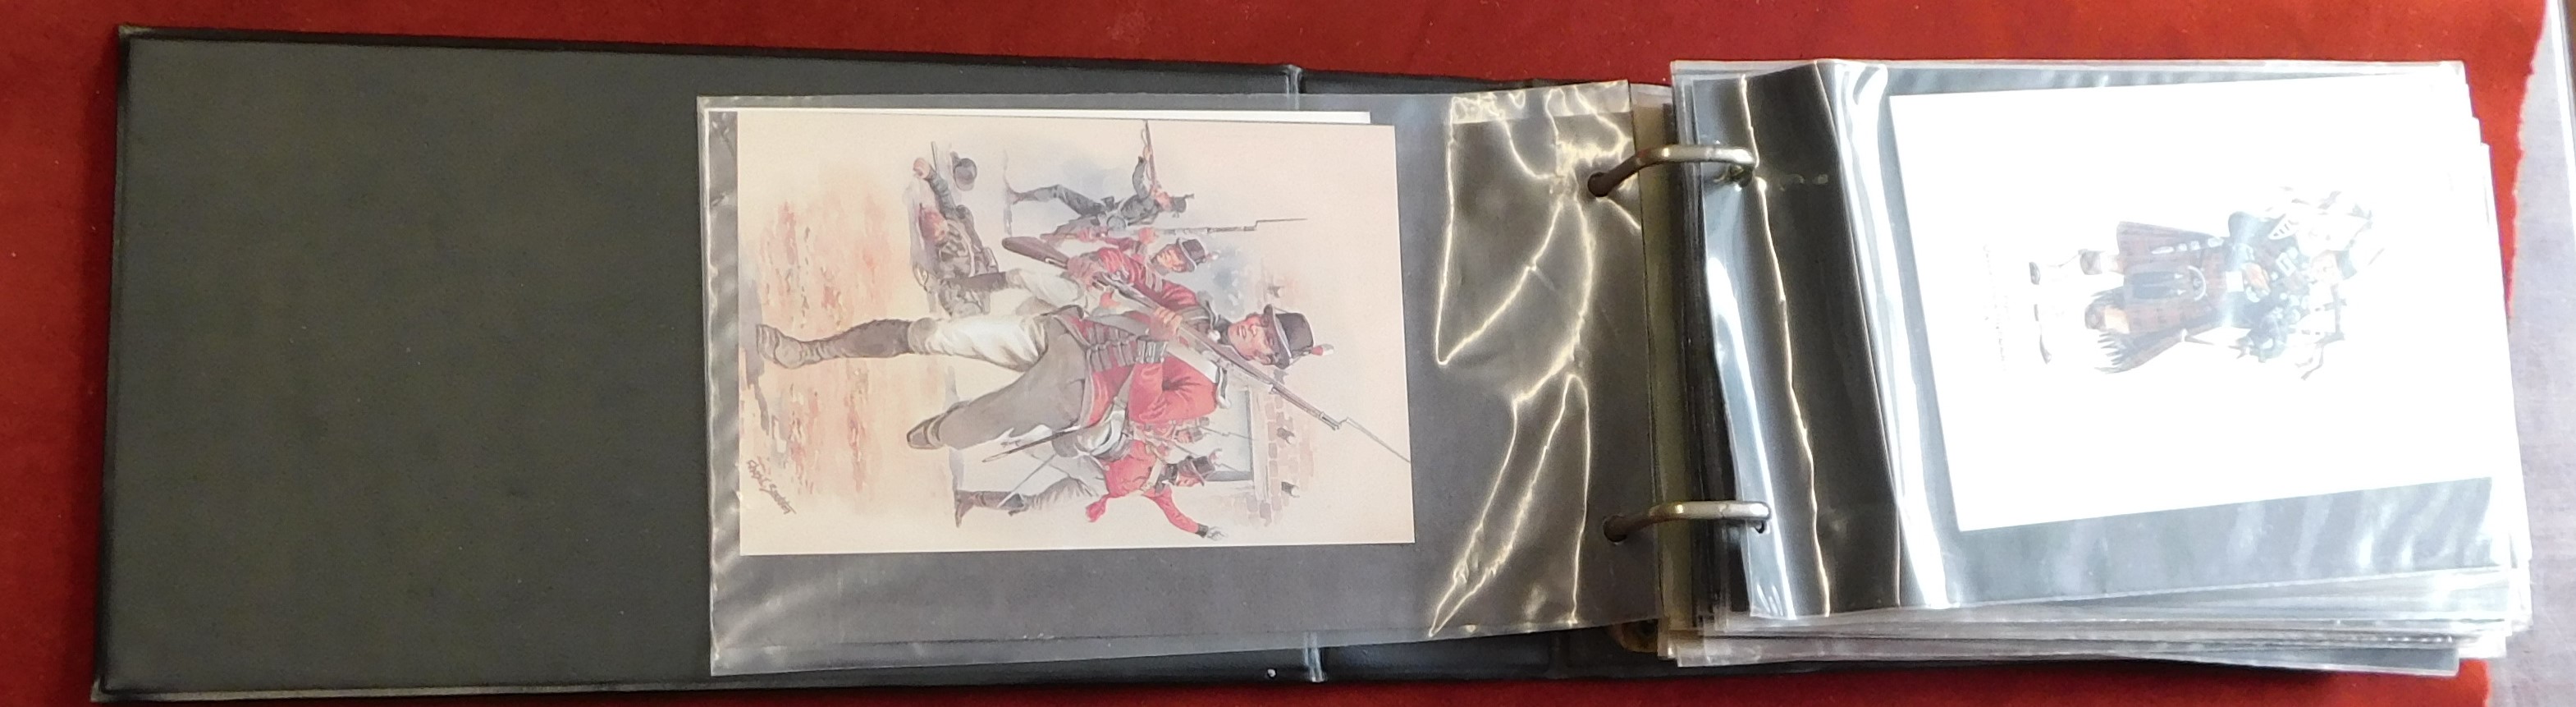 Postcards (1) Album of Military Cards containing military uniforms, parades etc (76 total) very good - Image 4 of 4